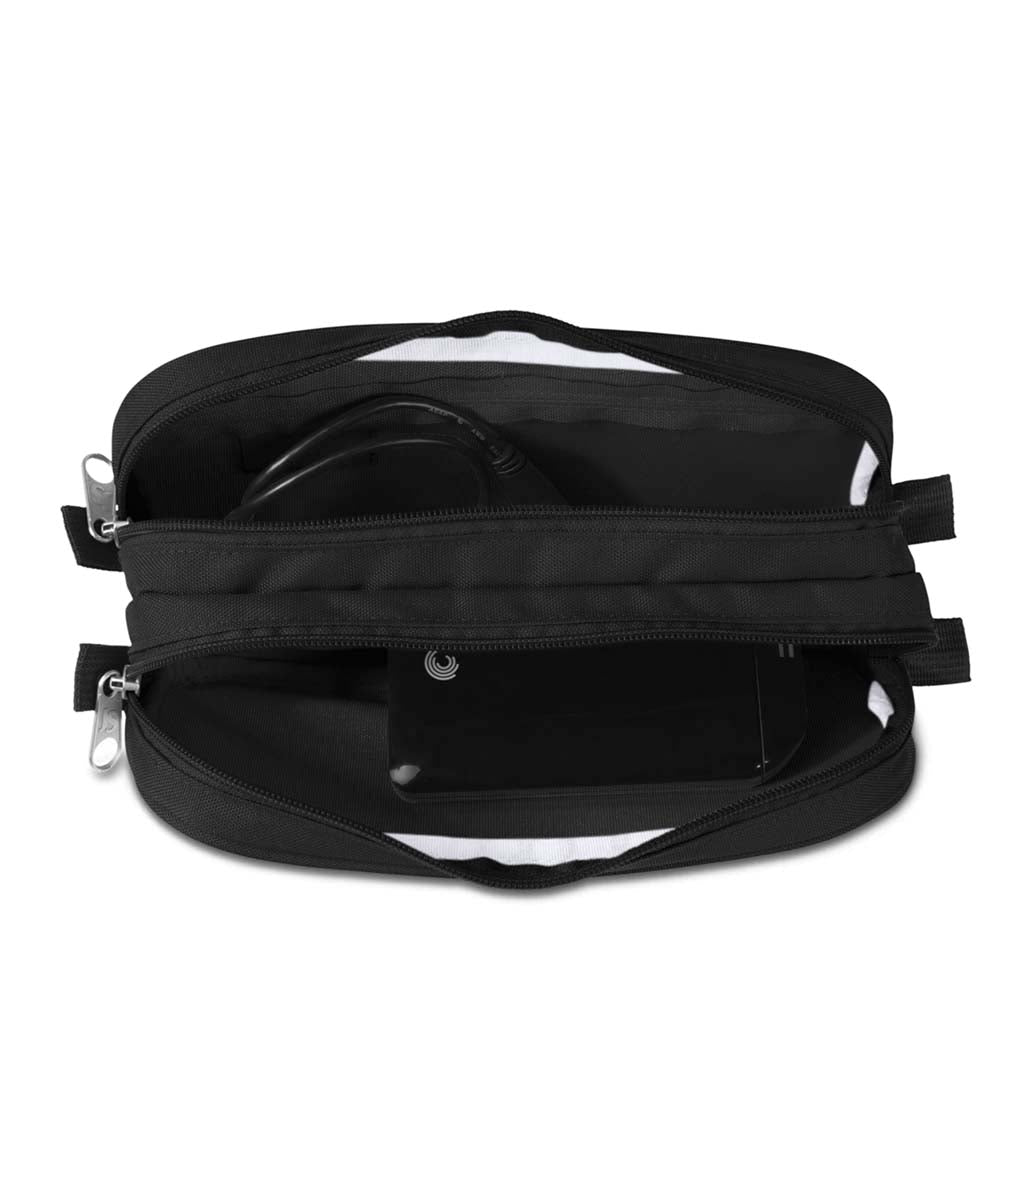 LARGE ACCESSORY POUCH - Black